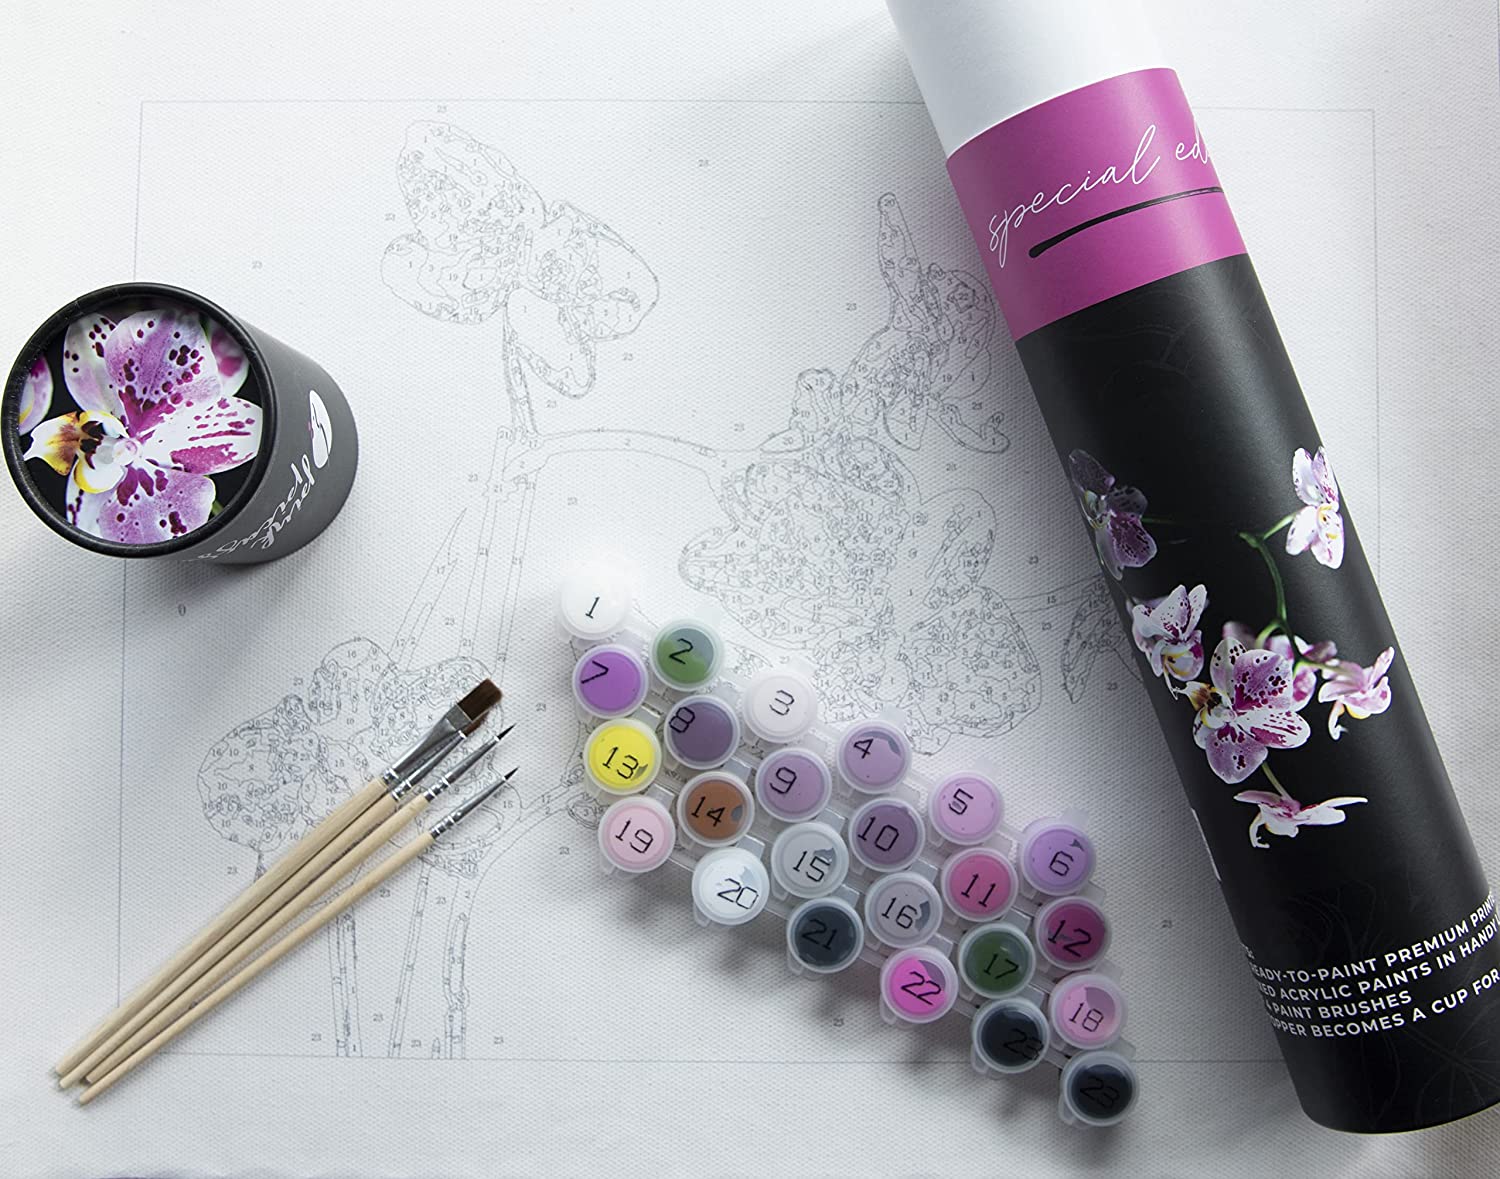 Pink Picasso Authenticity Paint by Number Kit 